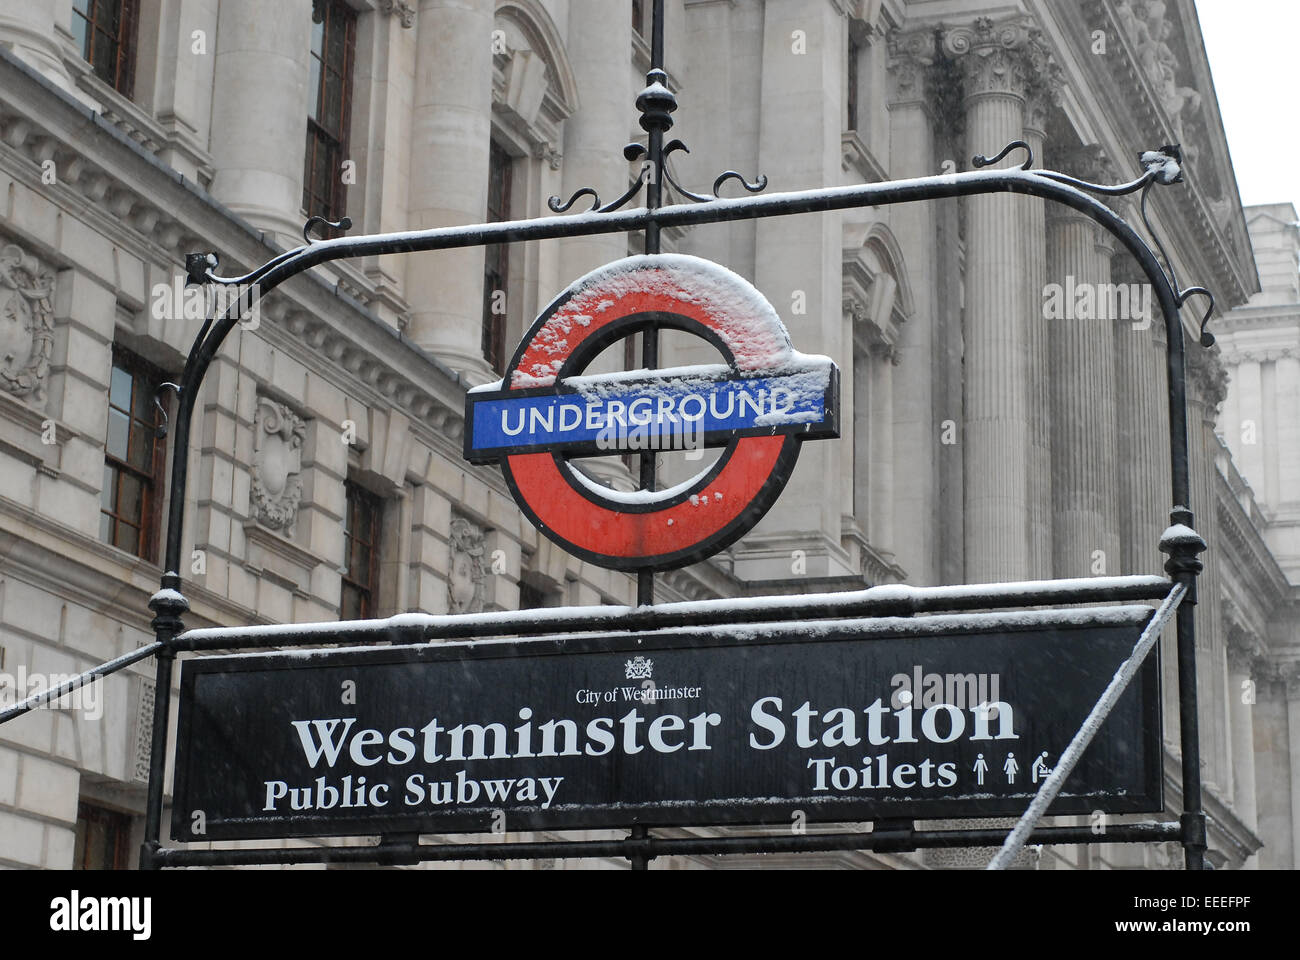 Westminster London Underground station sign in the snow Stock Photo